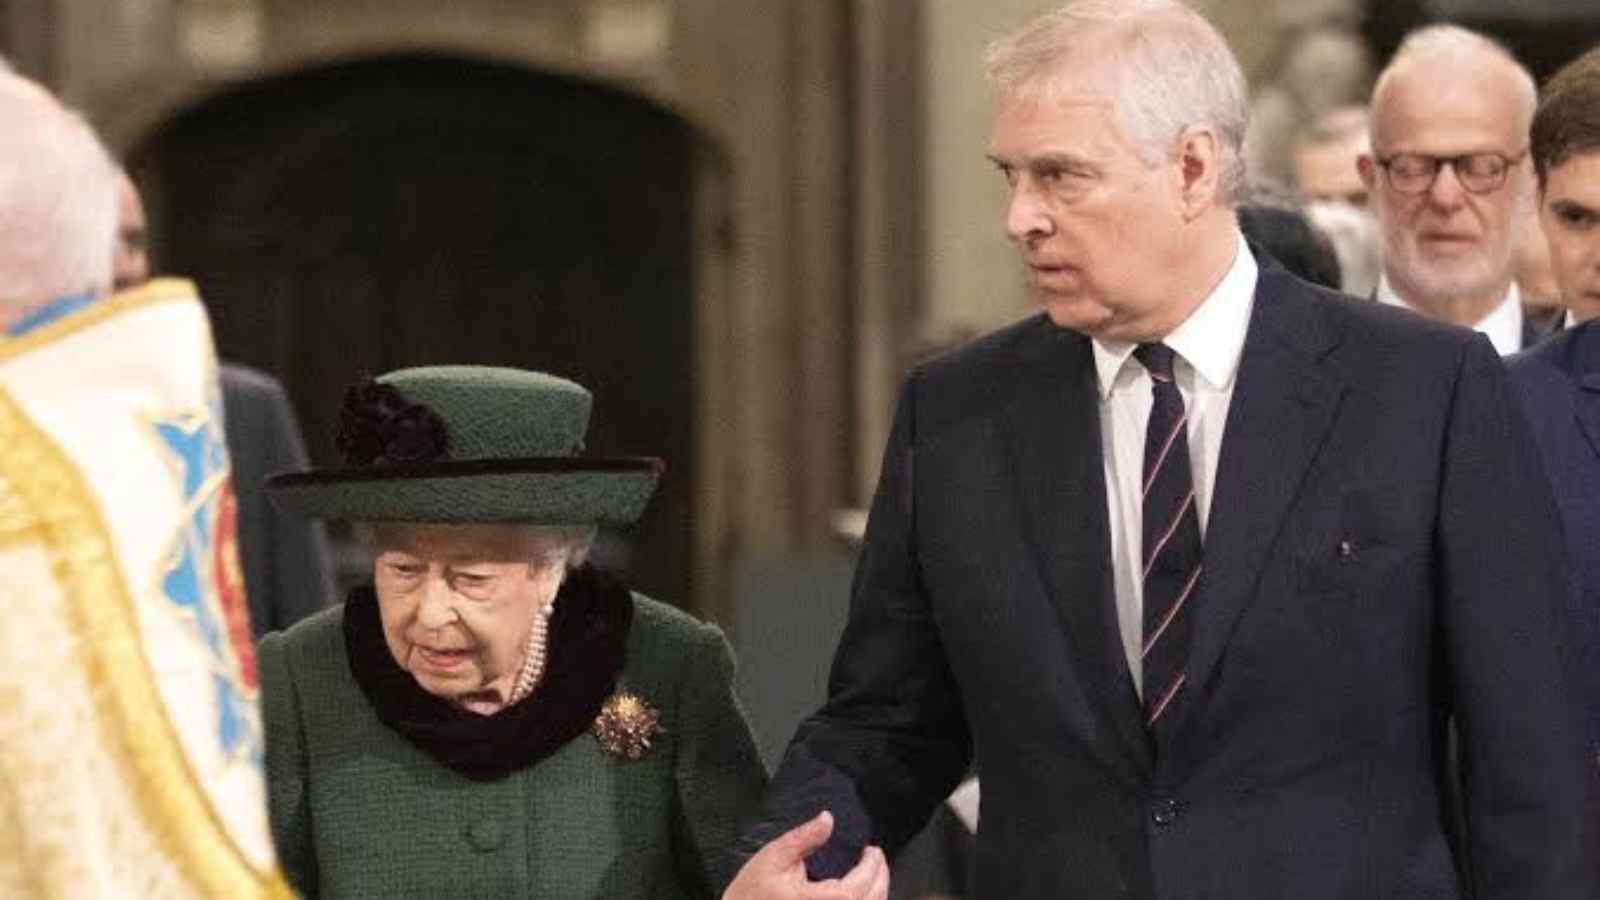 Prince Andrew with Late. Queen Elizabeth II